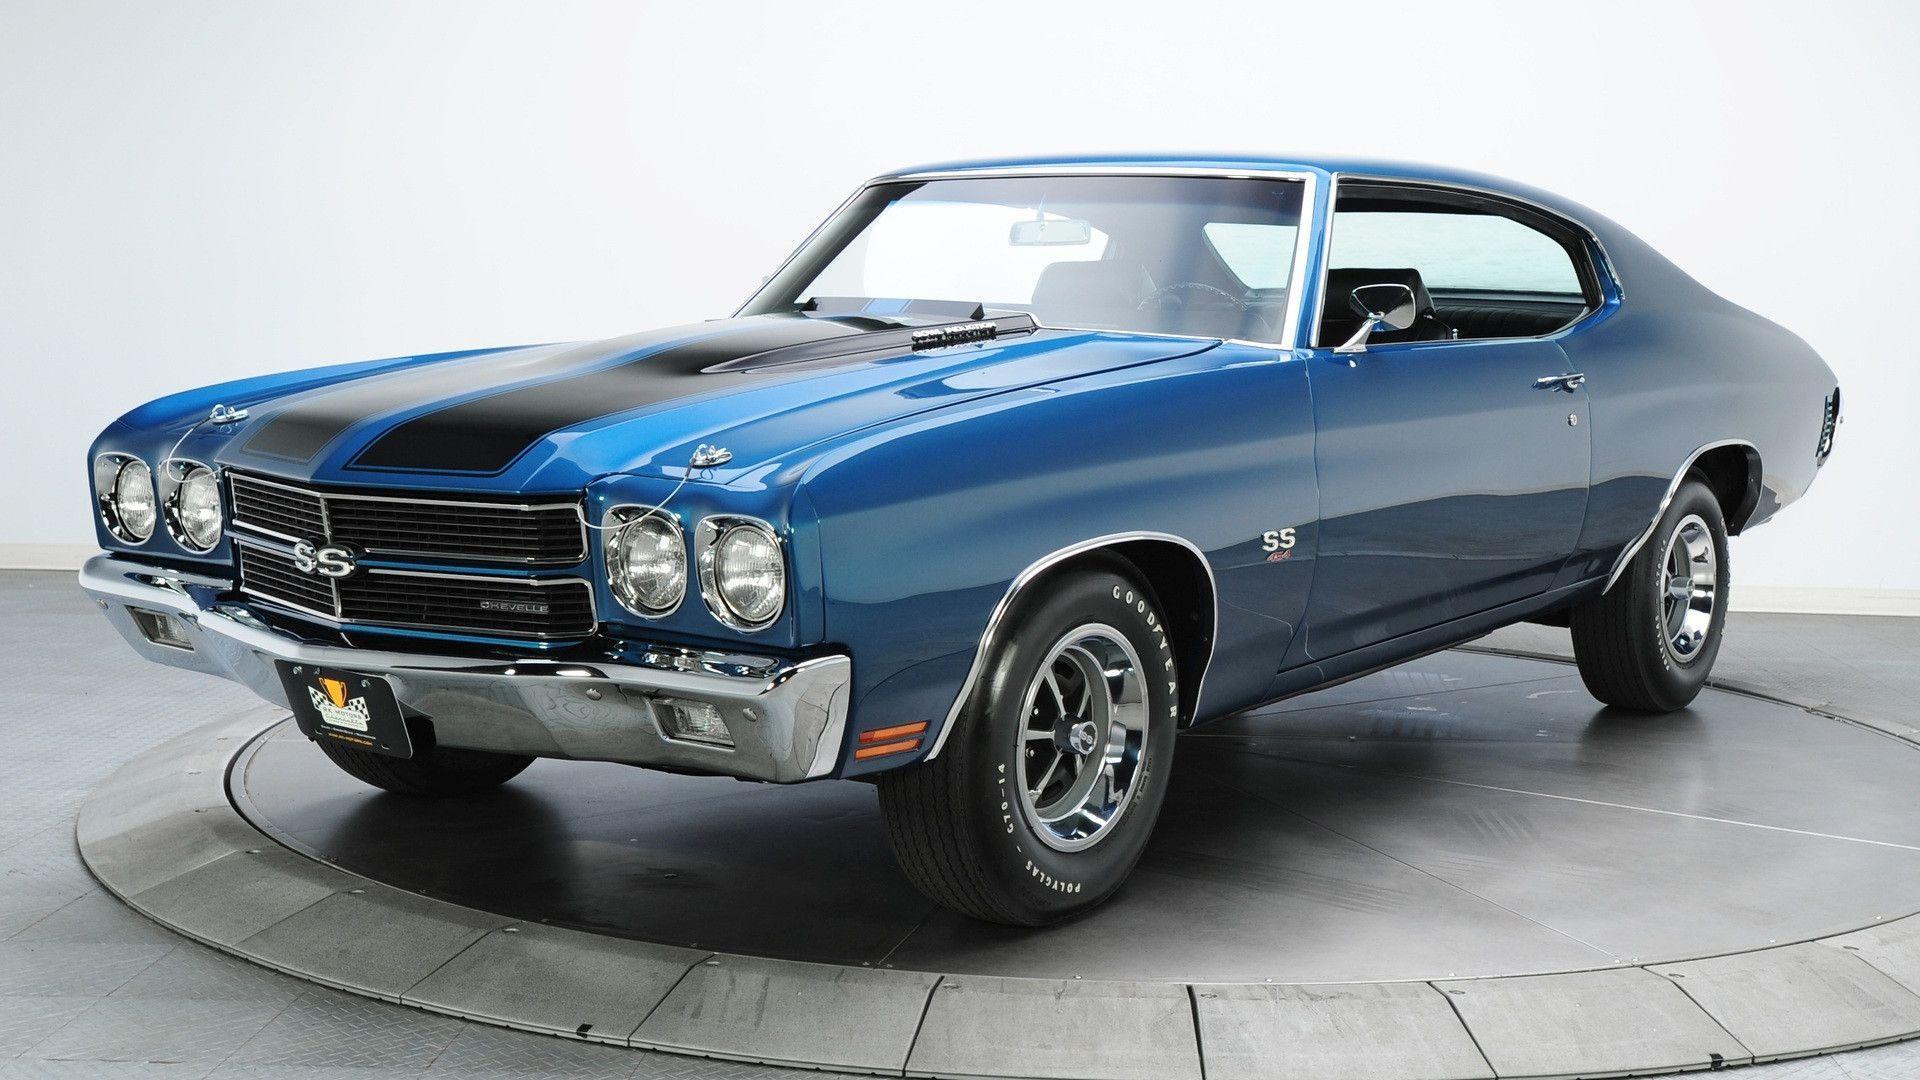 Chevy Chevelle Ss Wallpaper